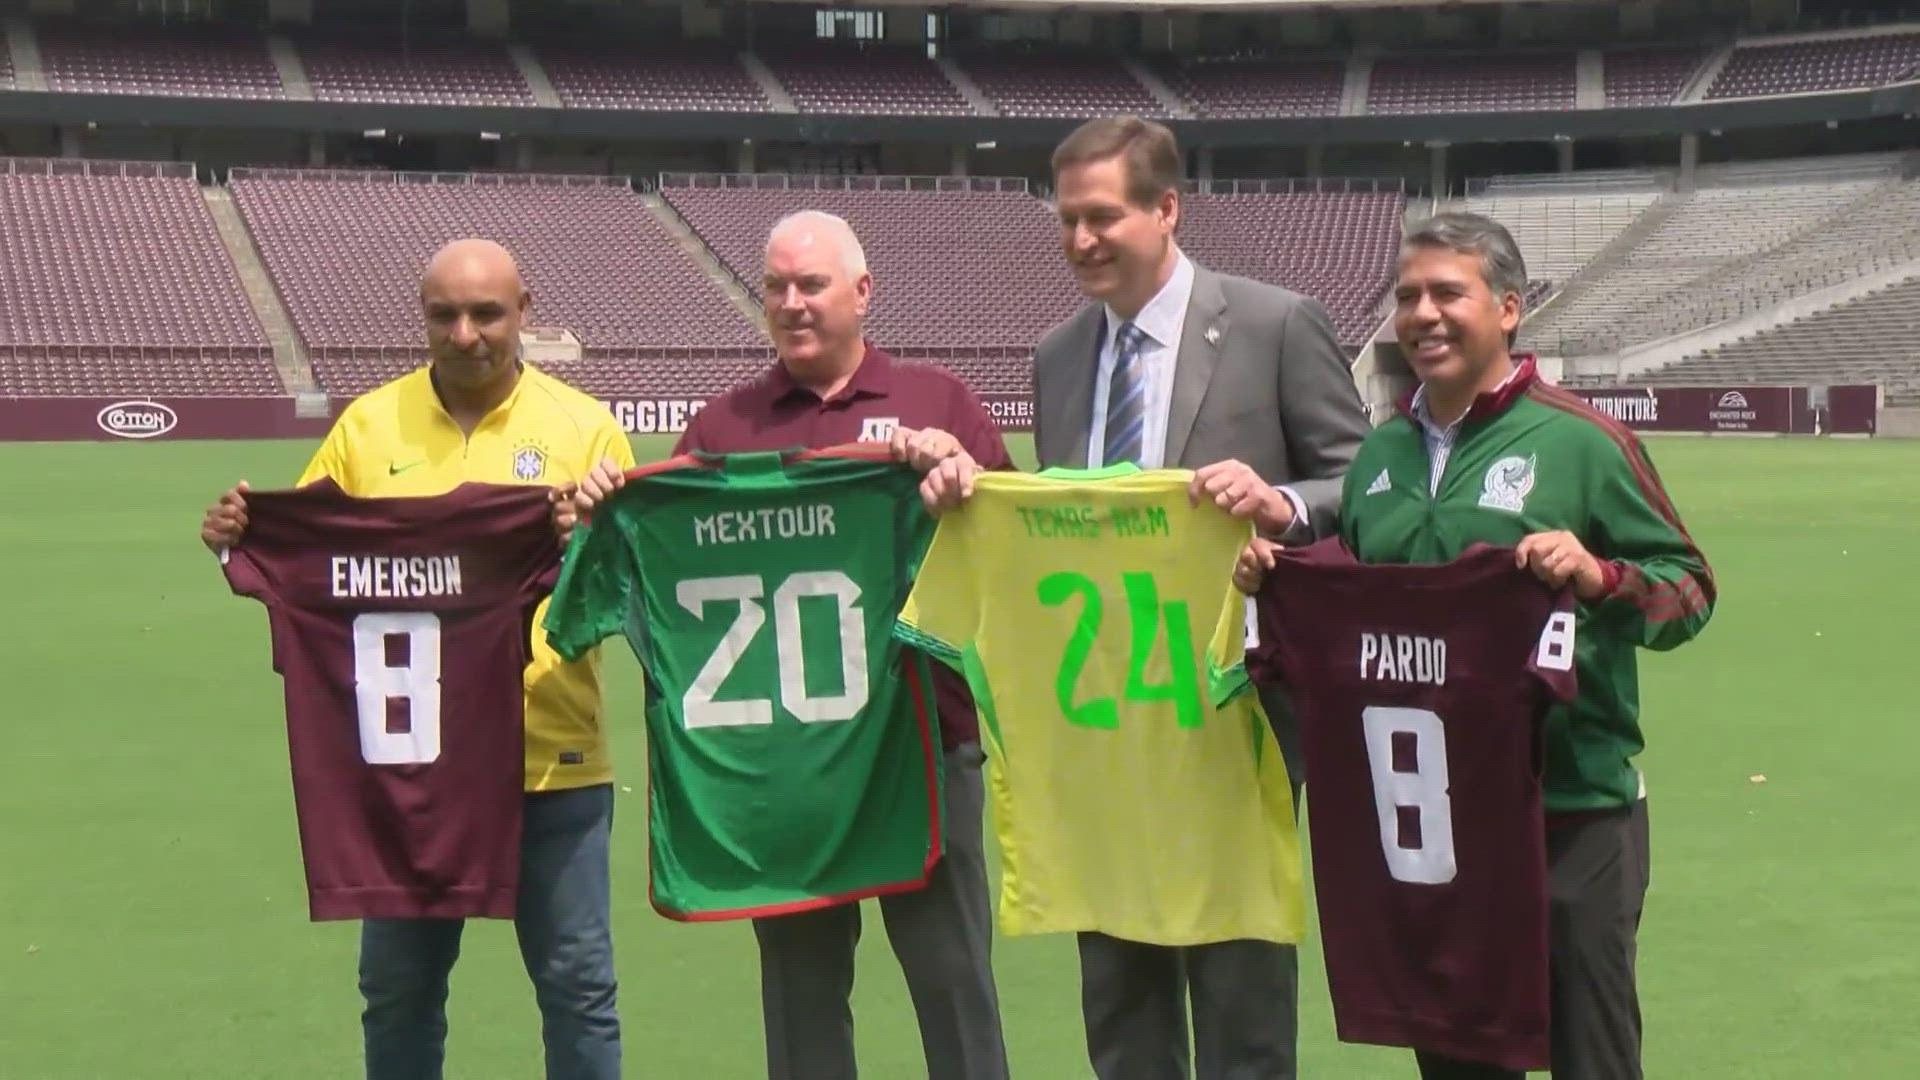 The Mexico and Brazil Futbol teams will face off at Kyle Field June 8.